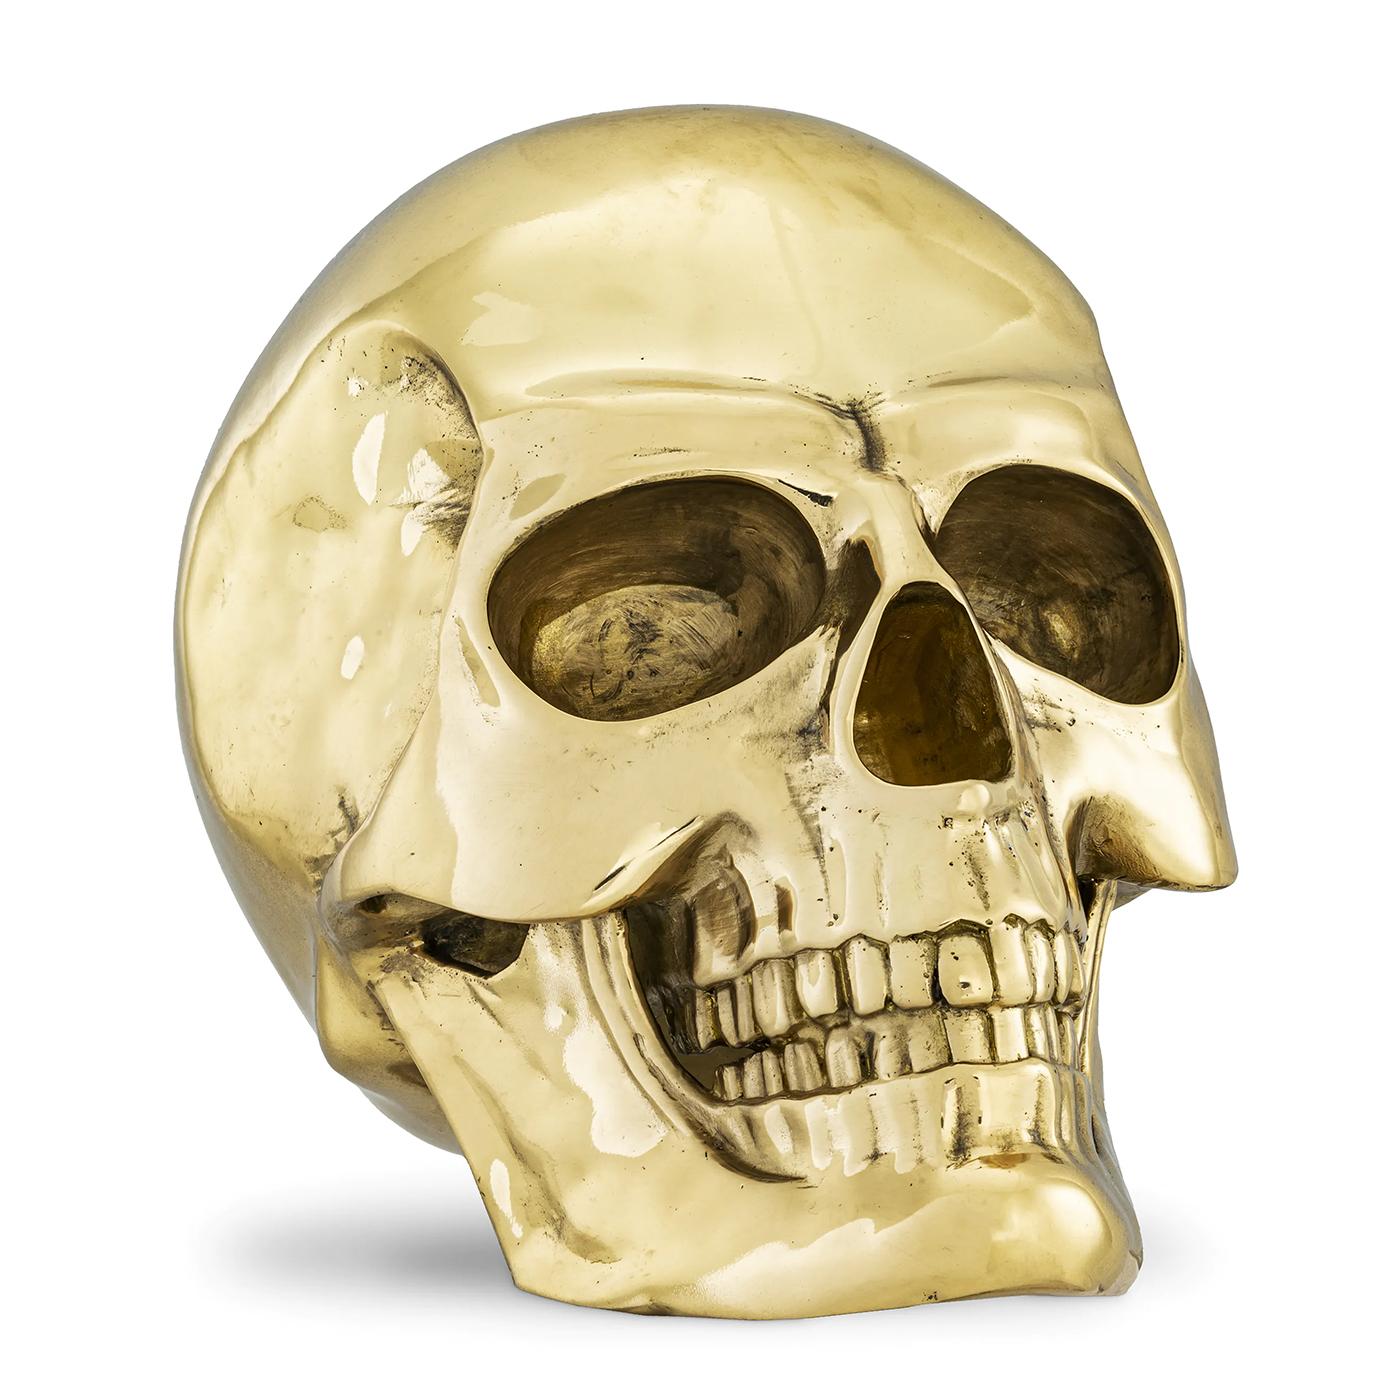 Sculpture brass skull all in solid.
brass in polished finish.